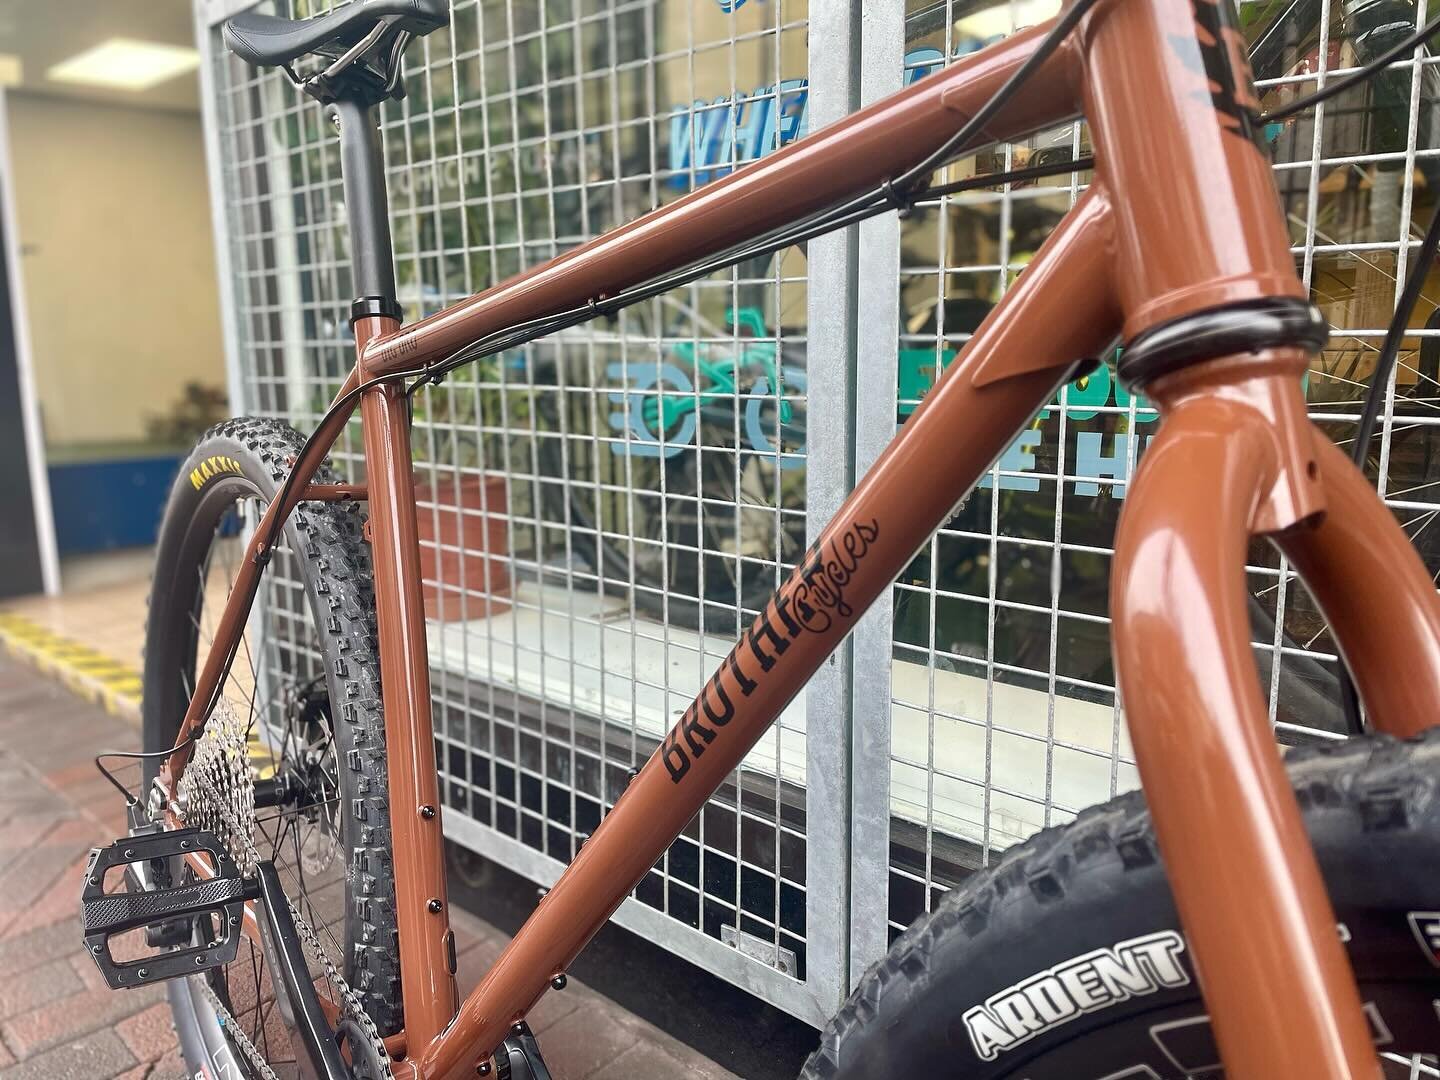 From the other day, woodland brown @brothercycles Big Bro headed to a new home with some big adventures planned! Not least this year&rsquo;s @dorset_divide! See you there!

This one rolling around with @rideshimano deore 12sp groupset, 4-pot brakes, 